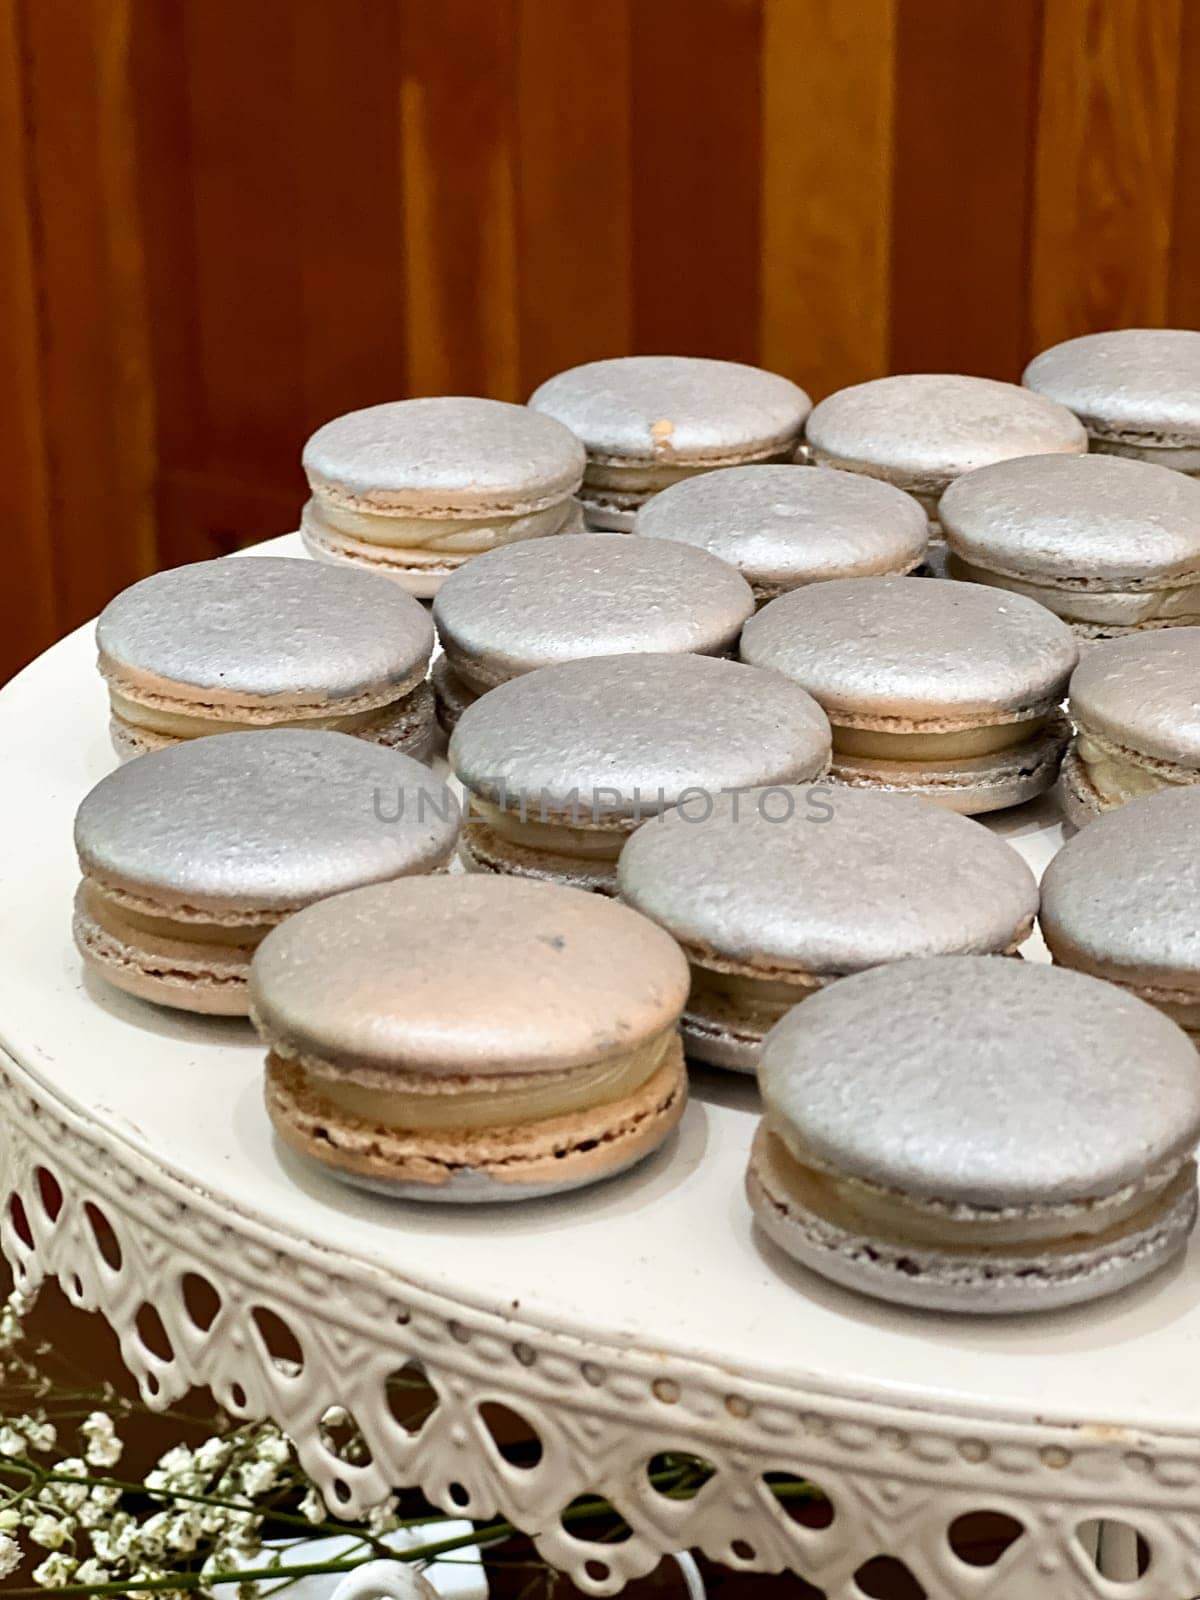 Silver French macarons in various flavors made to look extra fancy at a wedding reception dessert buffet.